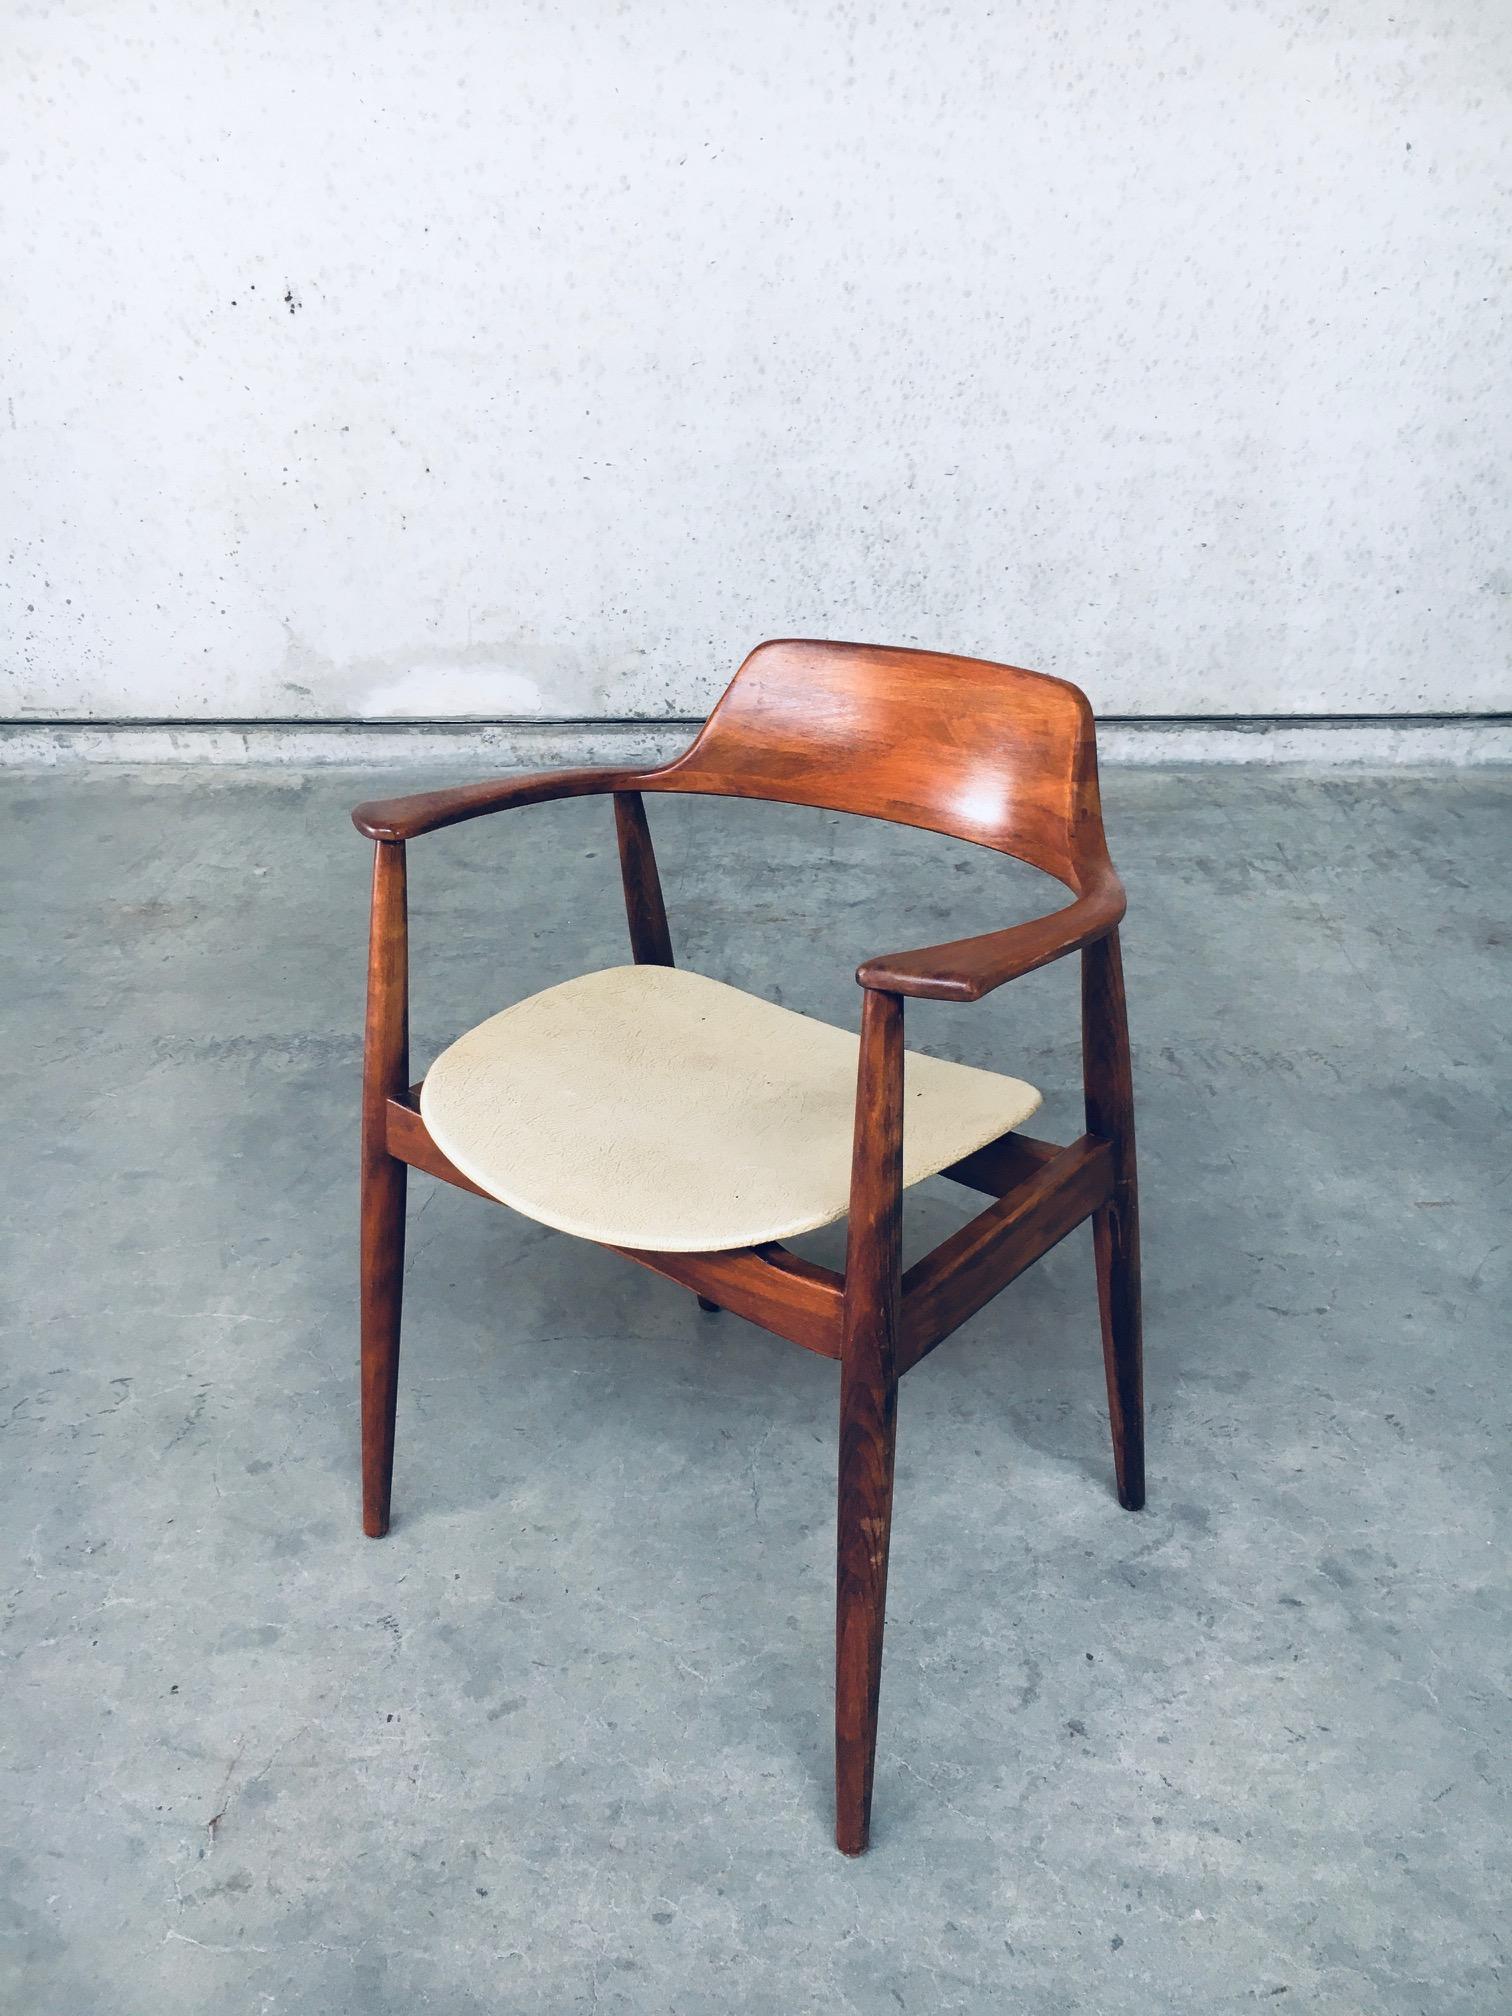 Vintage Rare Midcentury Modern Belgian Design 'JACAFONDA' Office Armrest Armchair by Ateliers Braun Fortuna, made in Gent, Belgium 1960's. Solid teak wood frame with simili faux leather covered seat. All original in used good condition. Simili faux